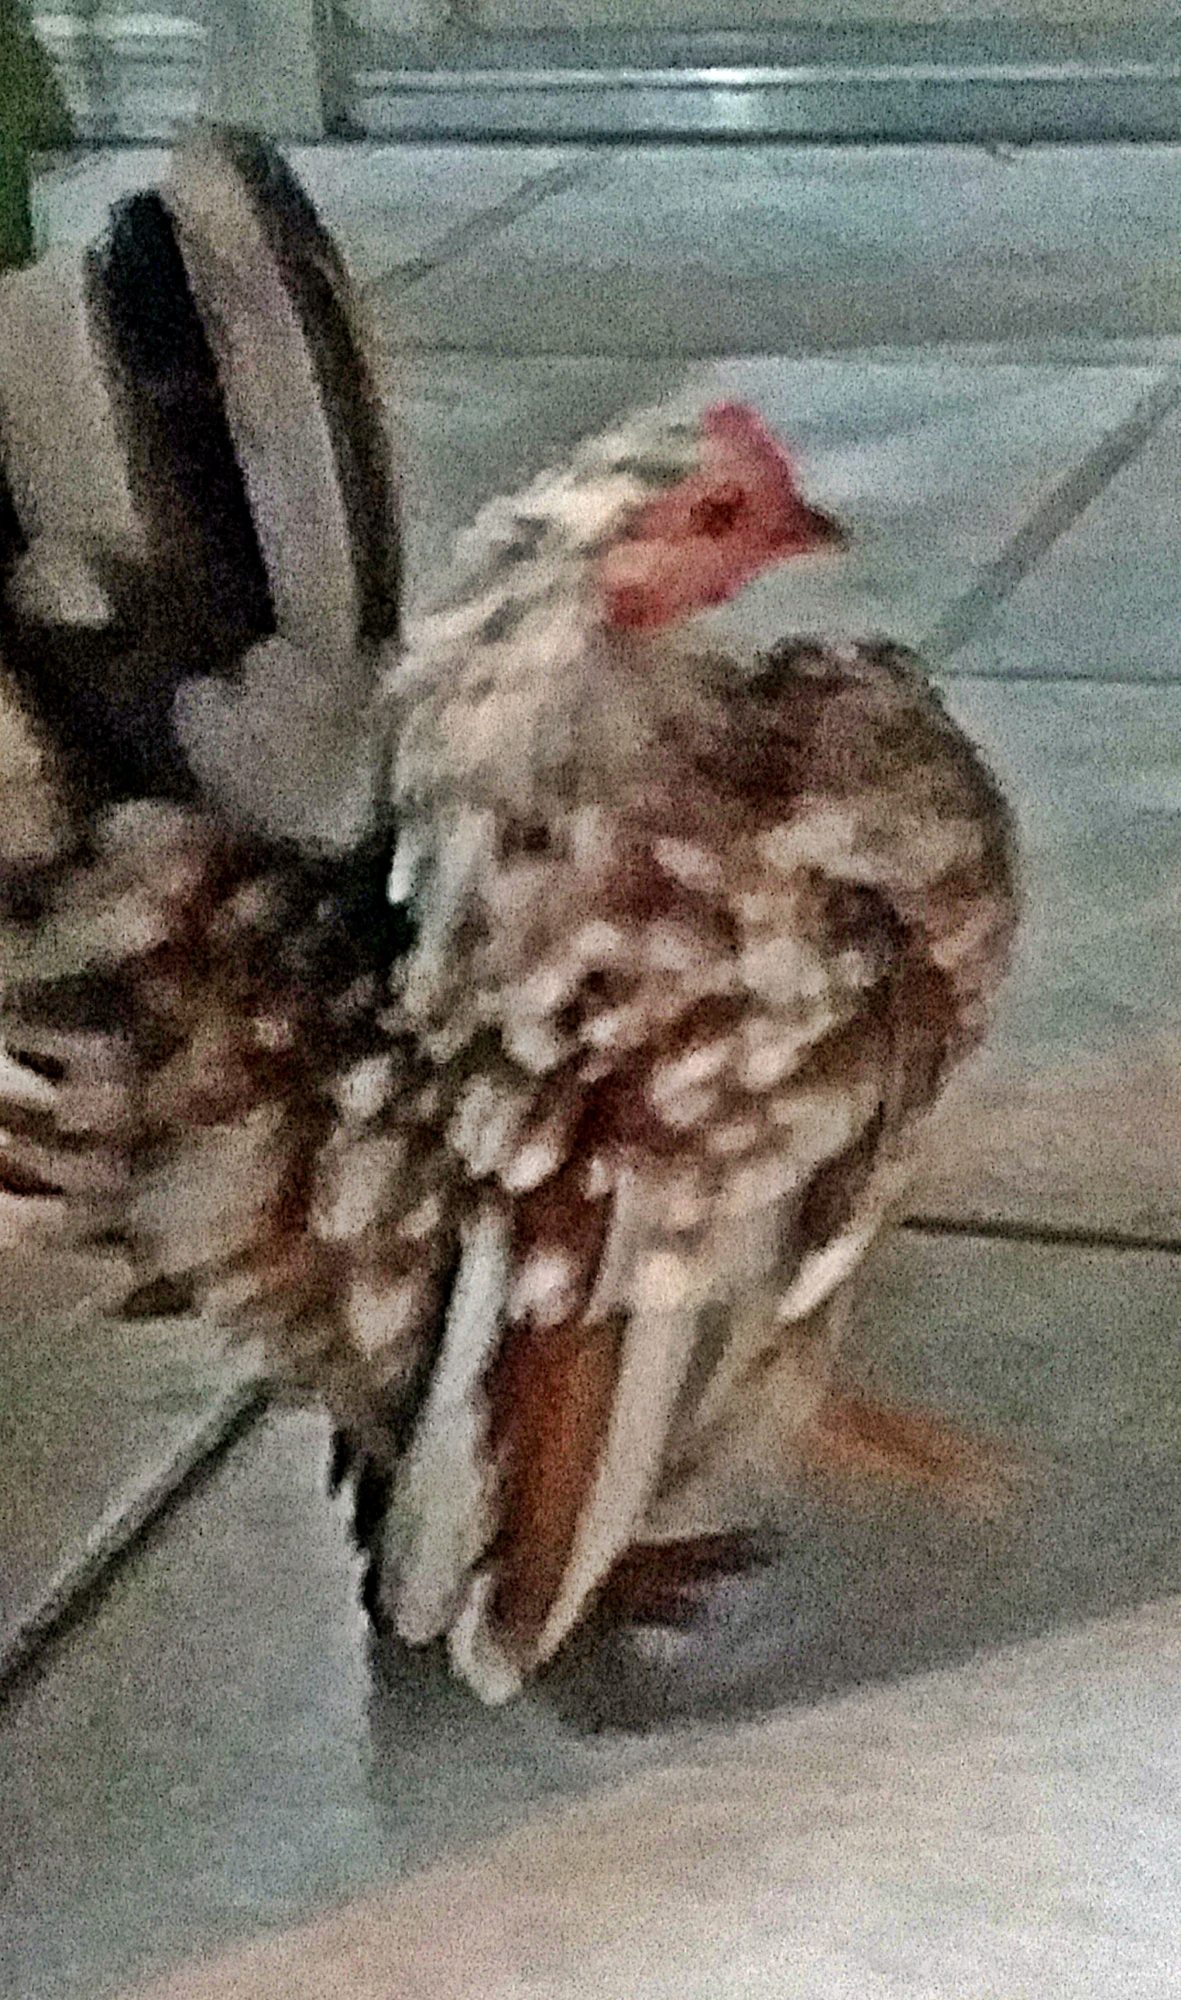 This is a pullet we hatched and raised, it comes from the "OC" line in California